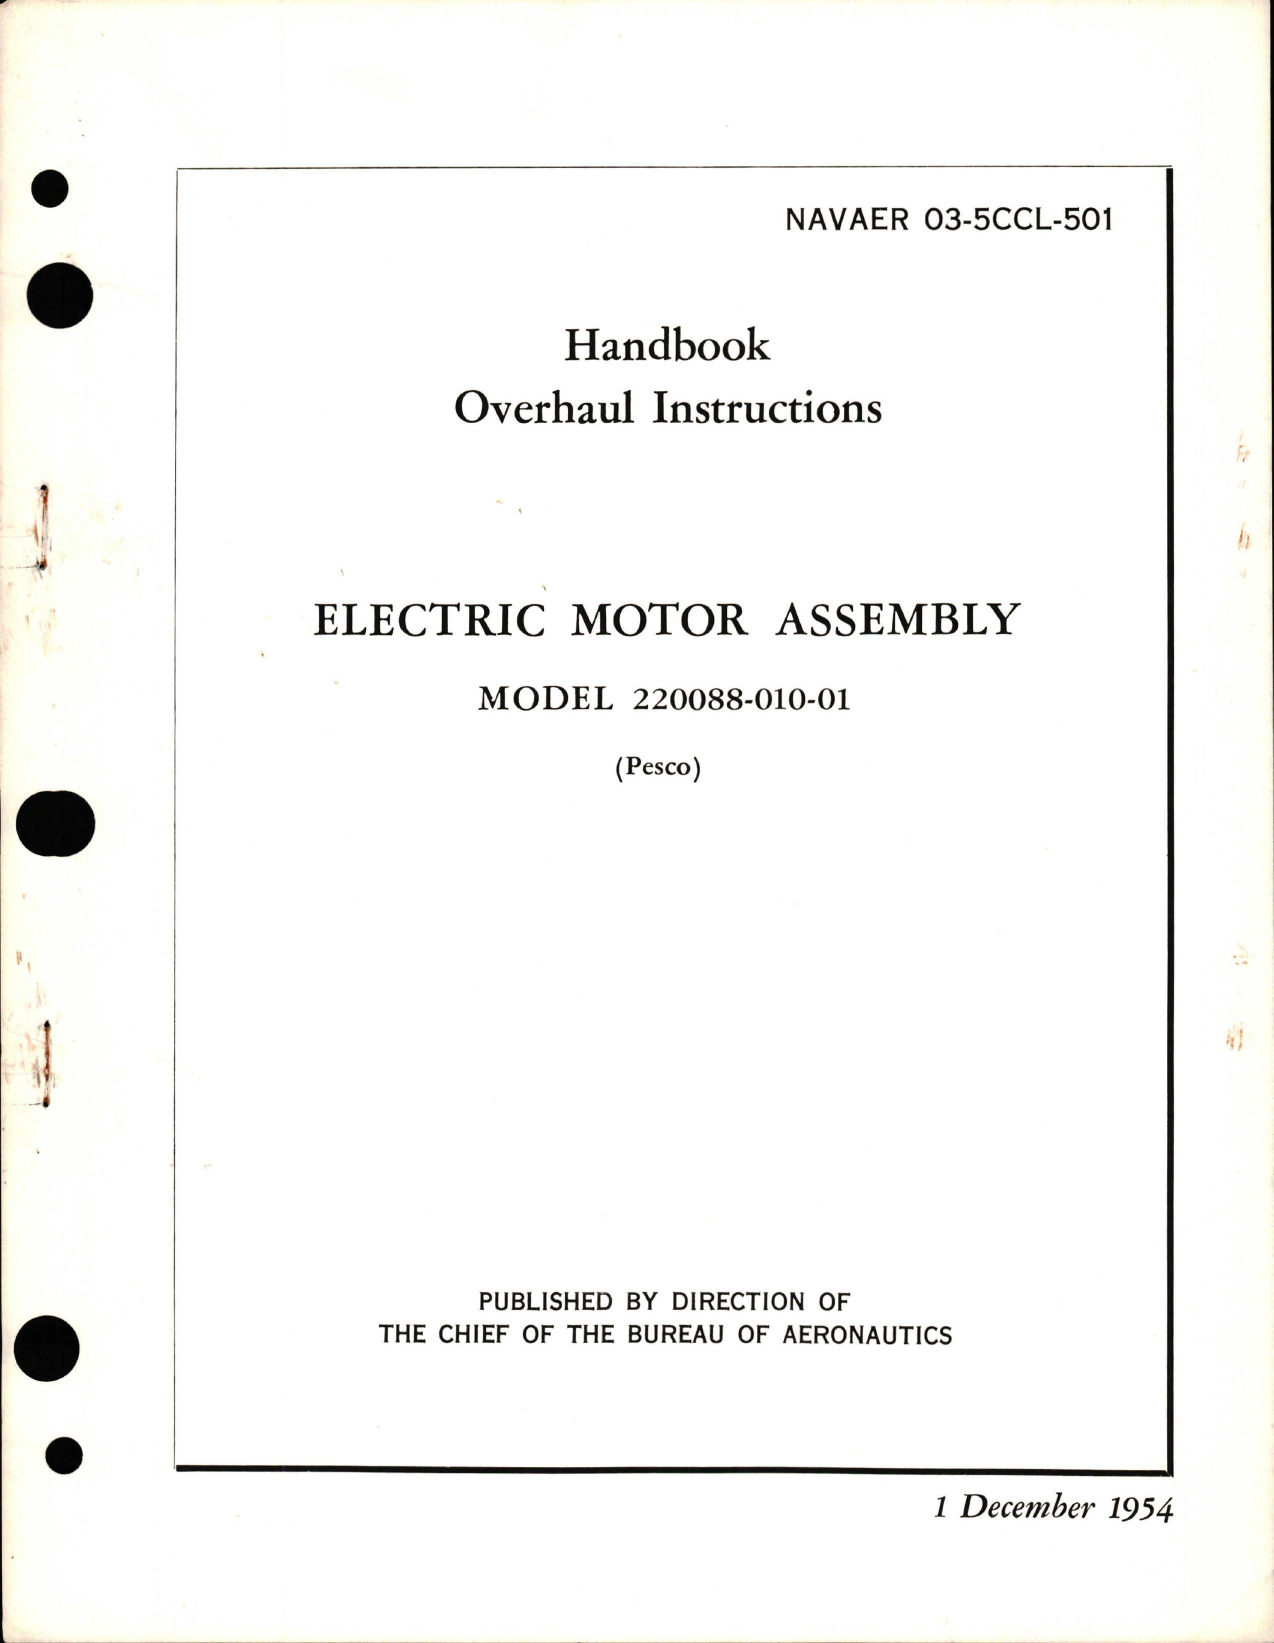 Sample page 1 from AirCorps Library document: Overhaul Instructions for Electric Motor Assembly - Model 220088-010-01